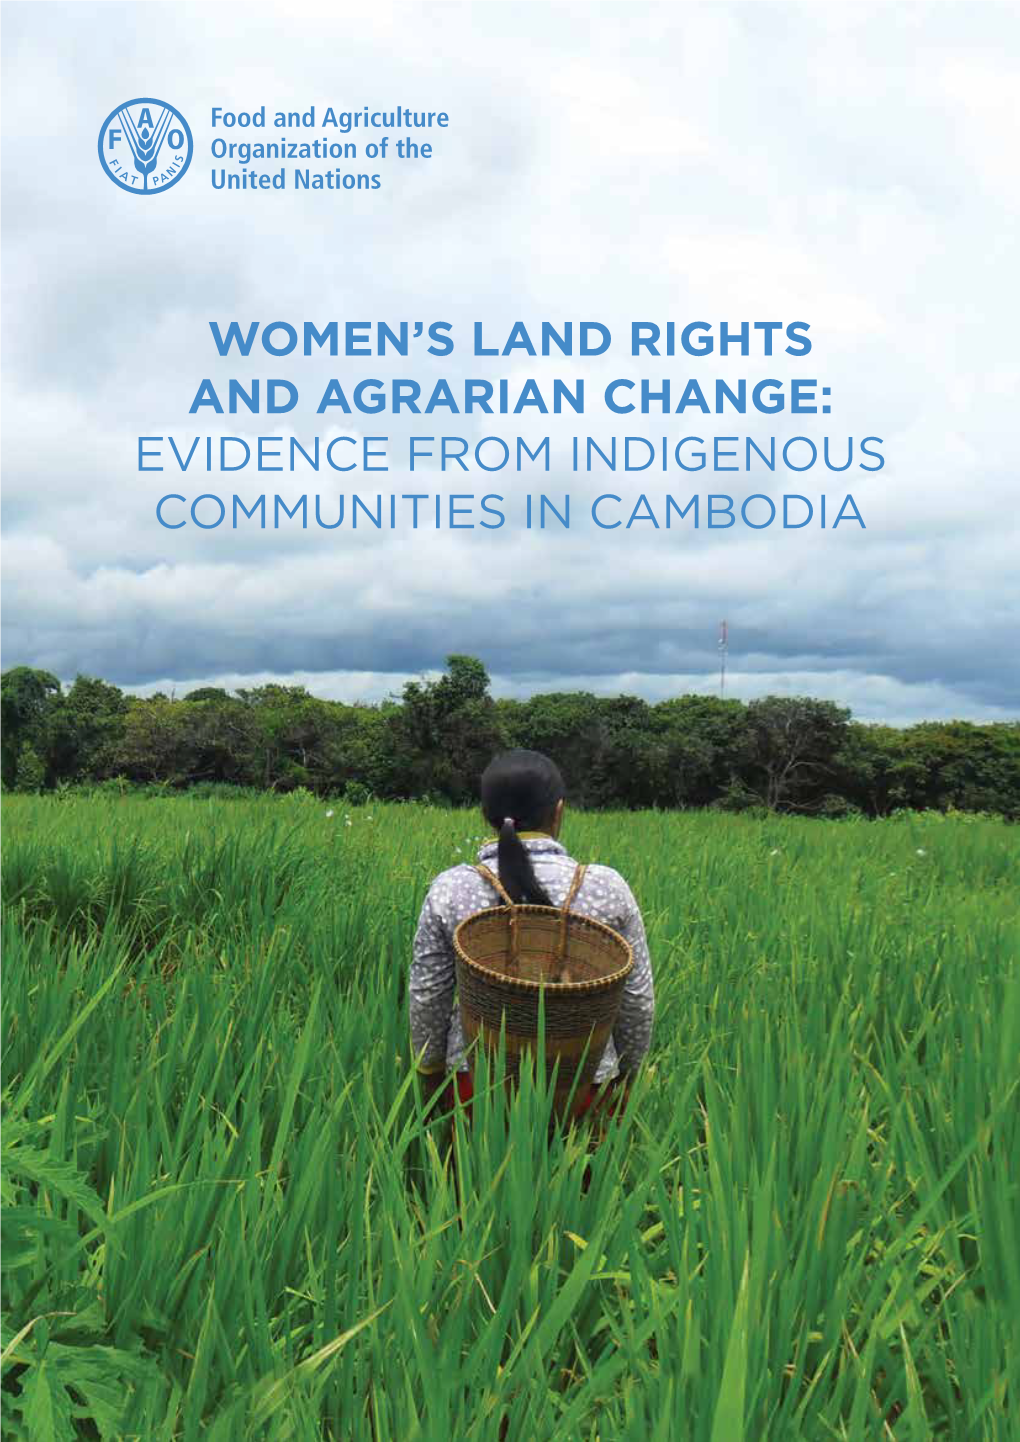 Women's Land Rights and Agrarian Change: Evidence from Indigenous